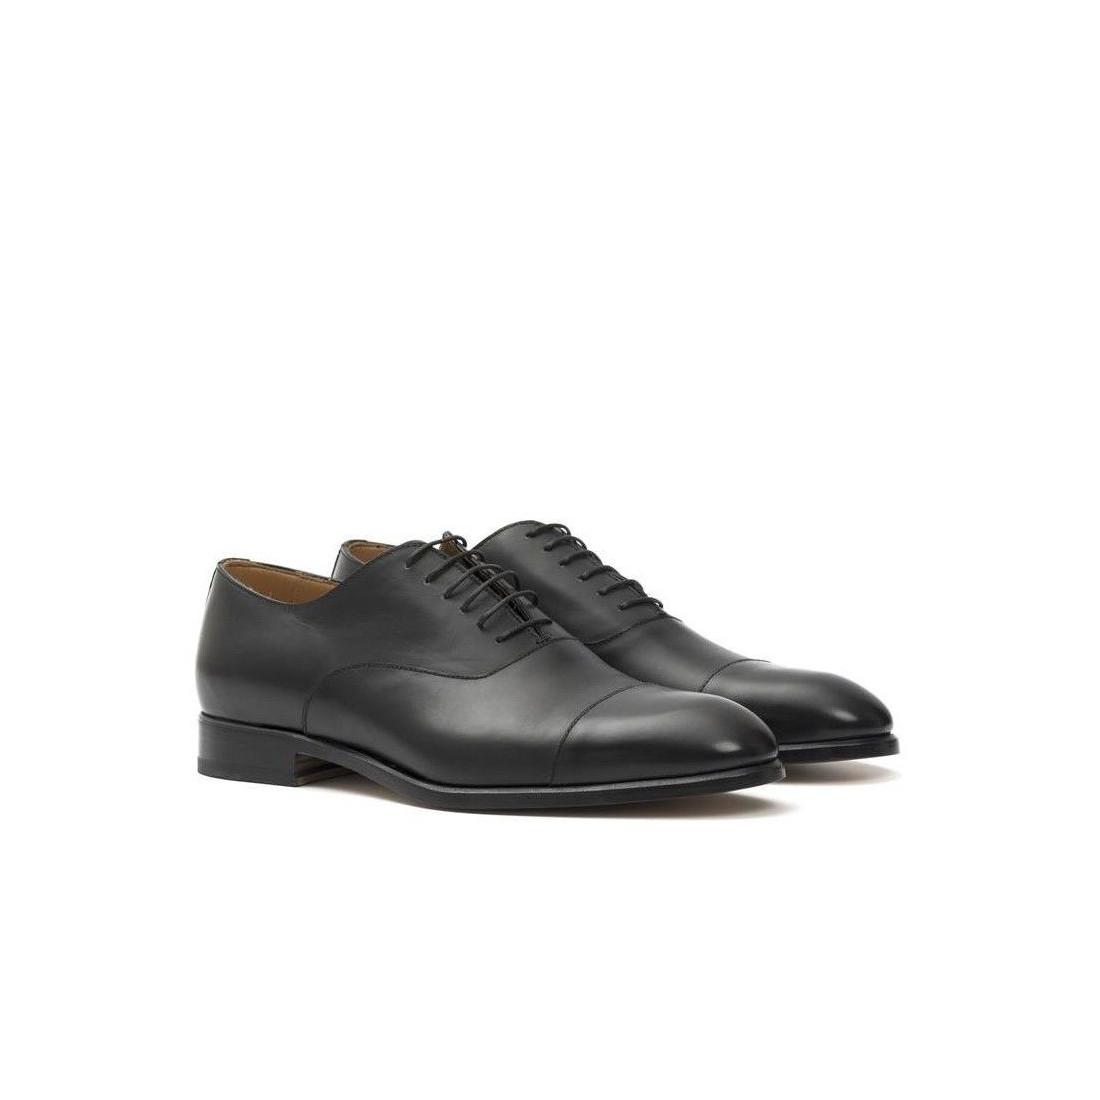 Elegant oxford shoes in black leather